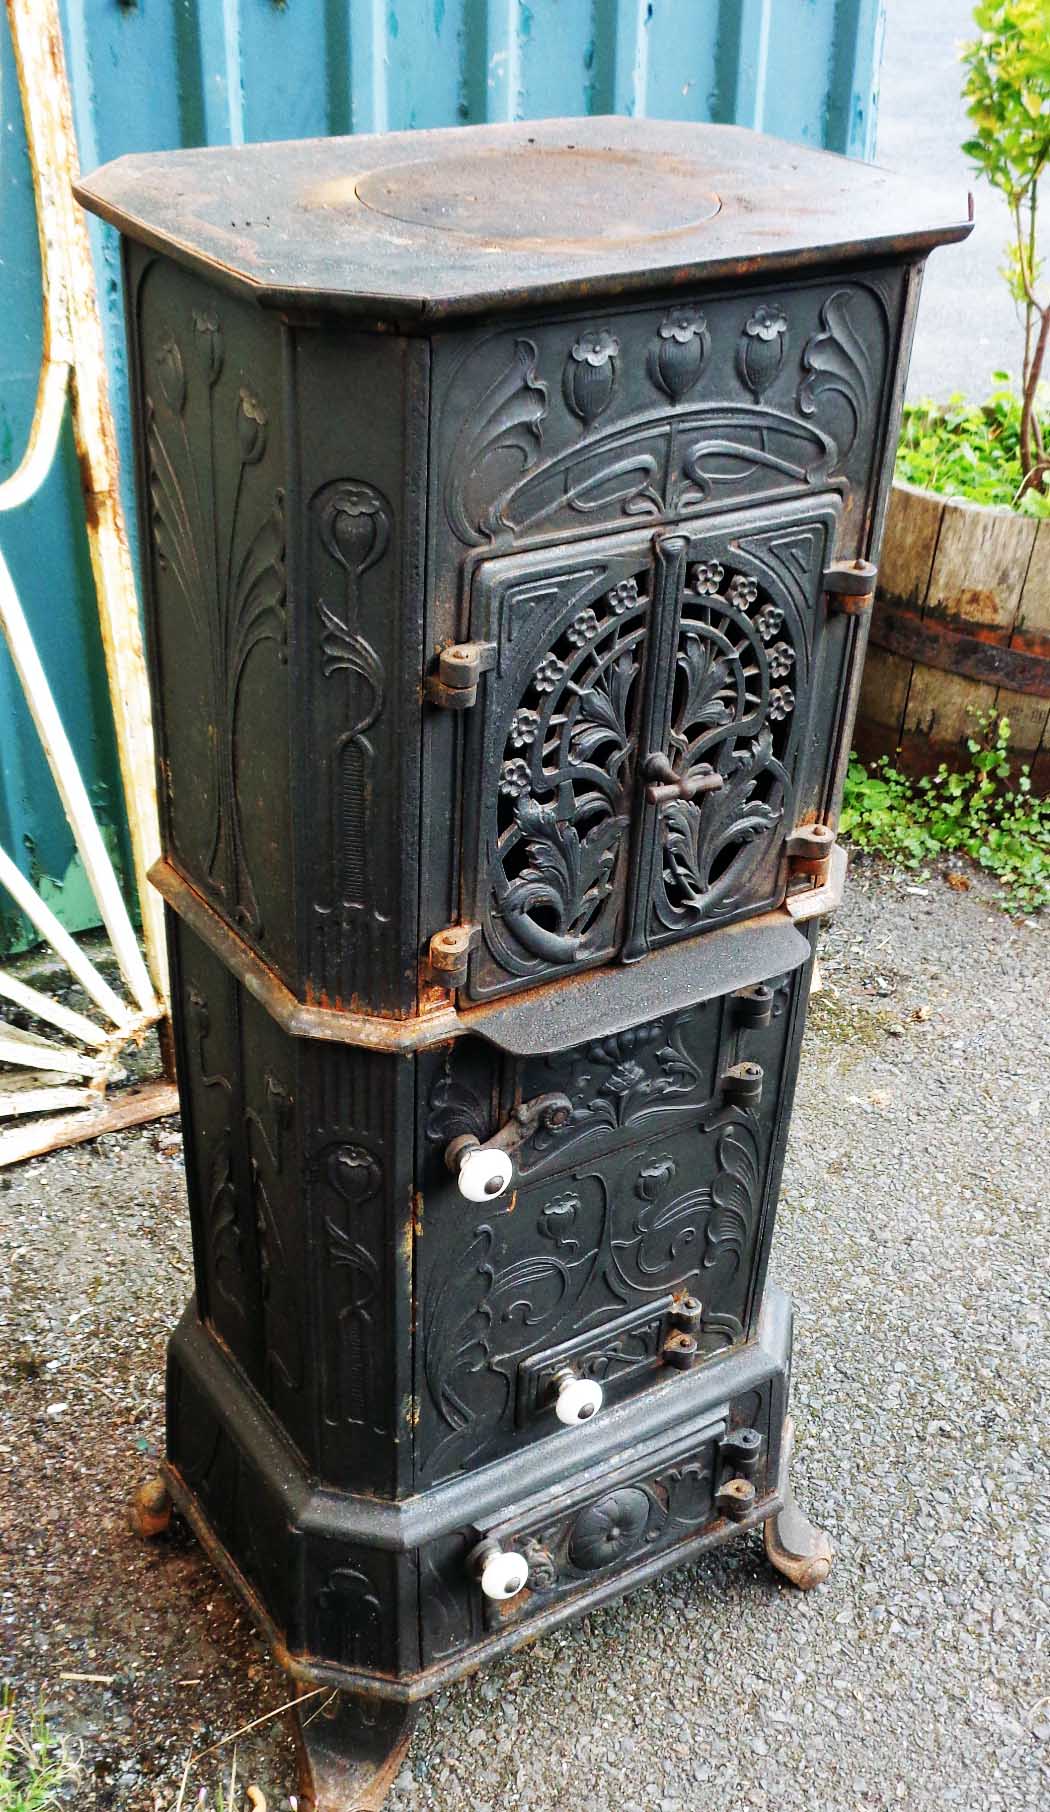 A 16 1/2" modern upright cast iron wood burner in the Art Nouveau style, with moulded flower heads